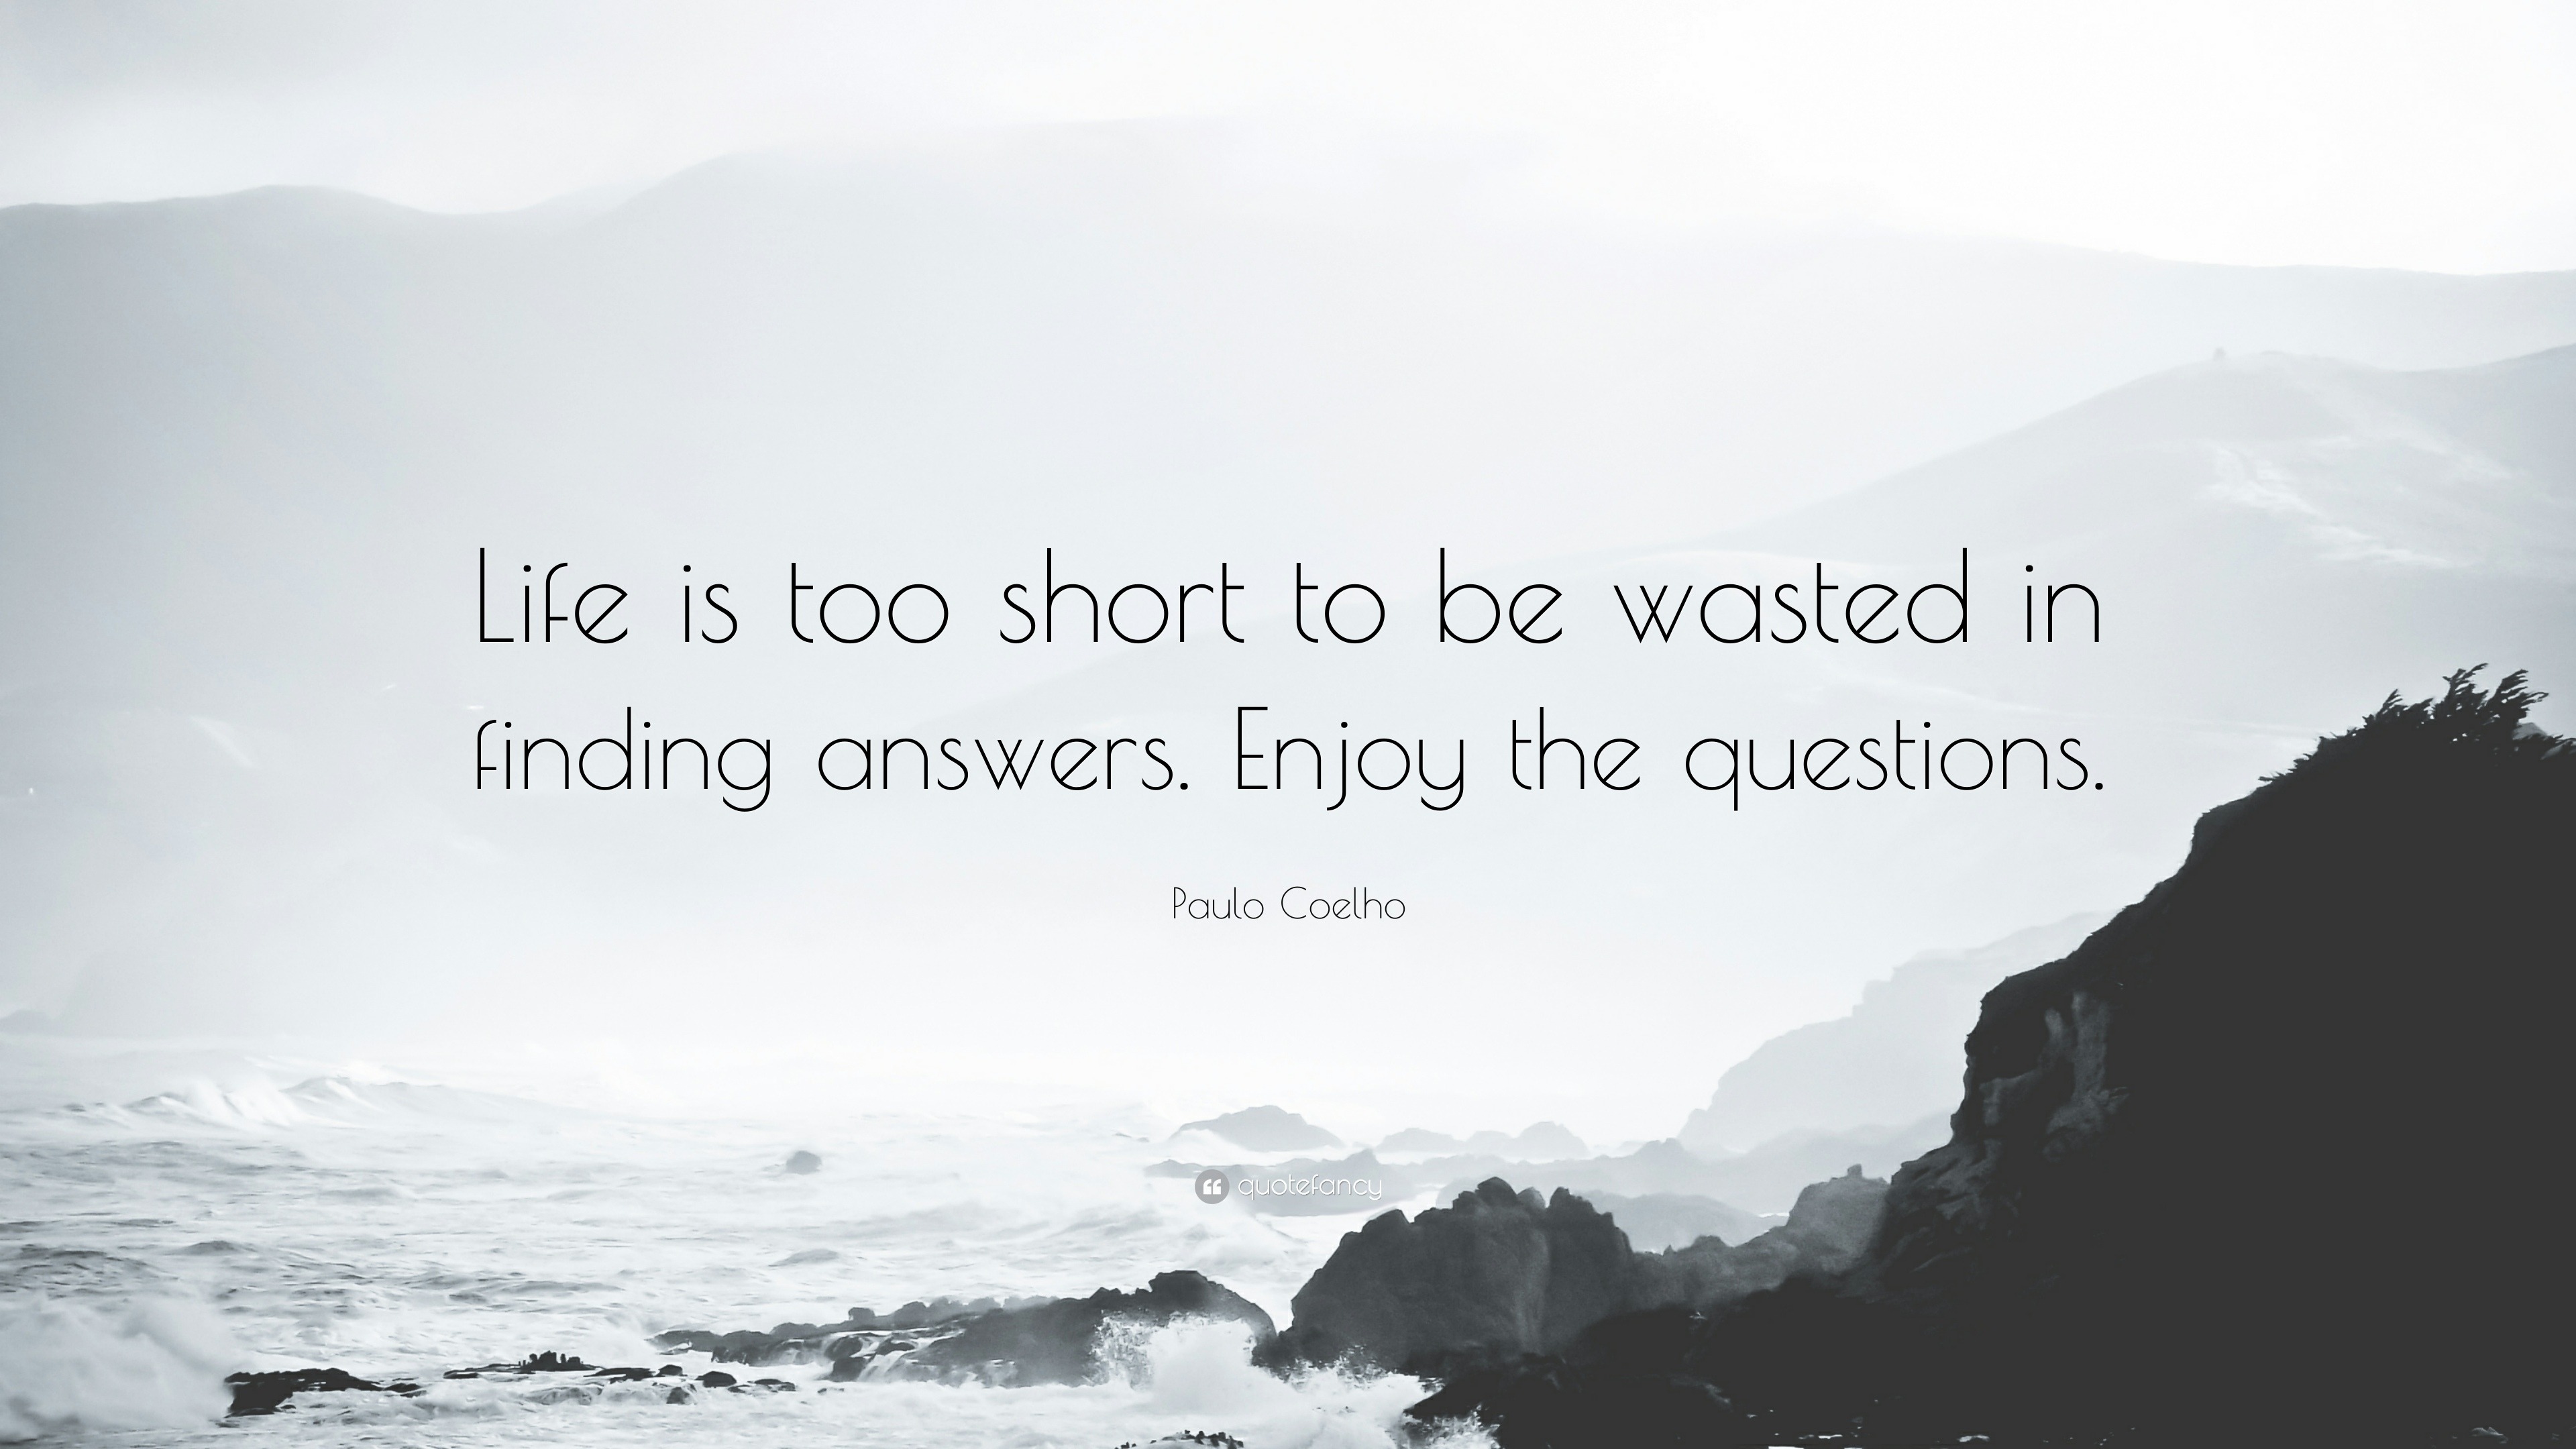 Paulo Coelho Quote “Life is too short to be wasted in finding answers